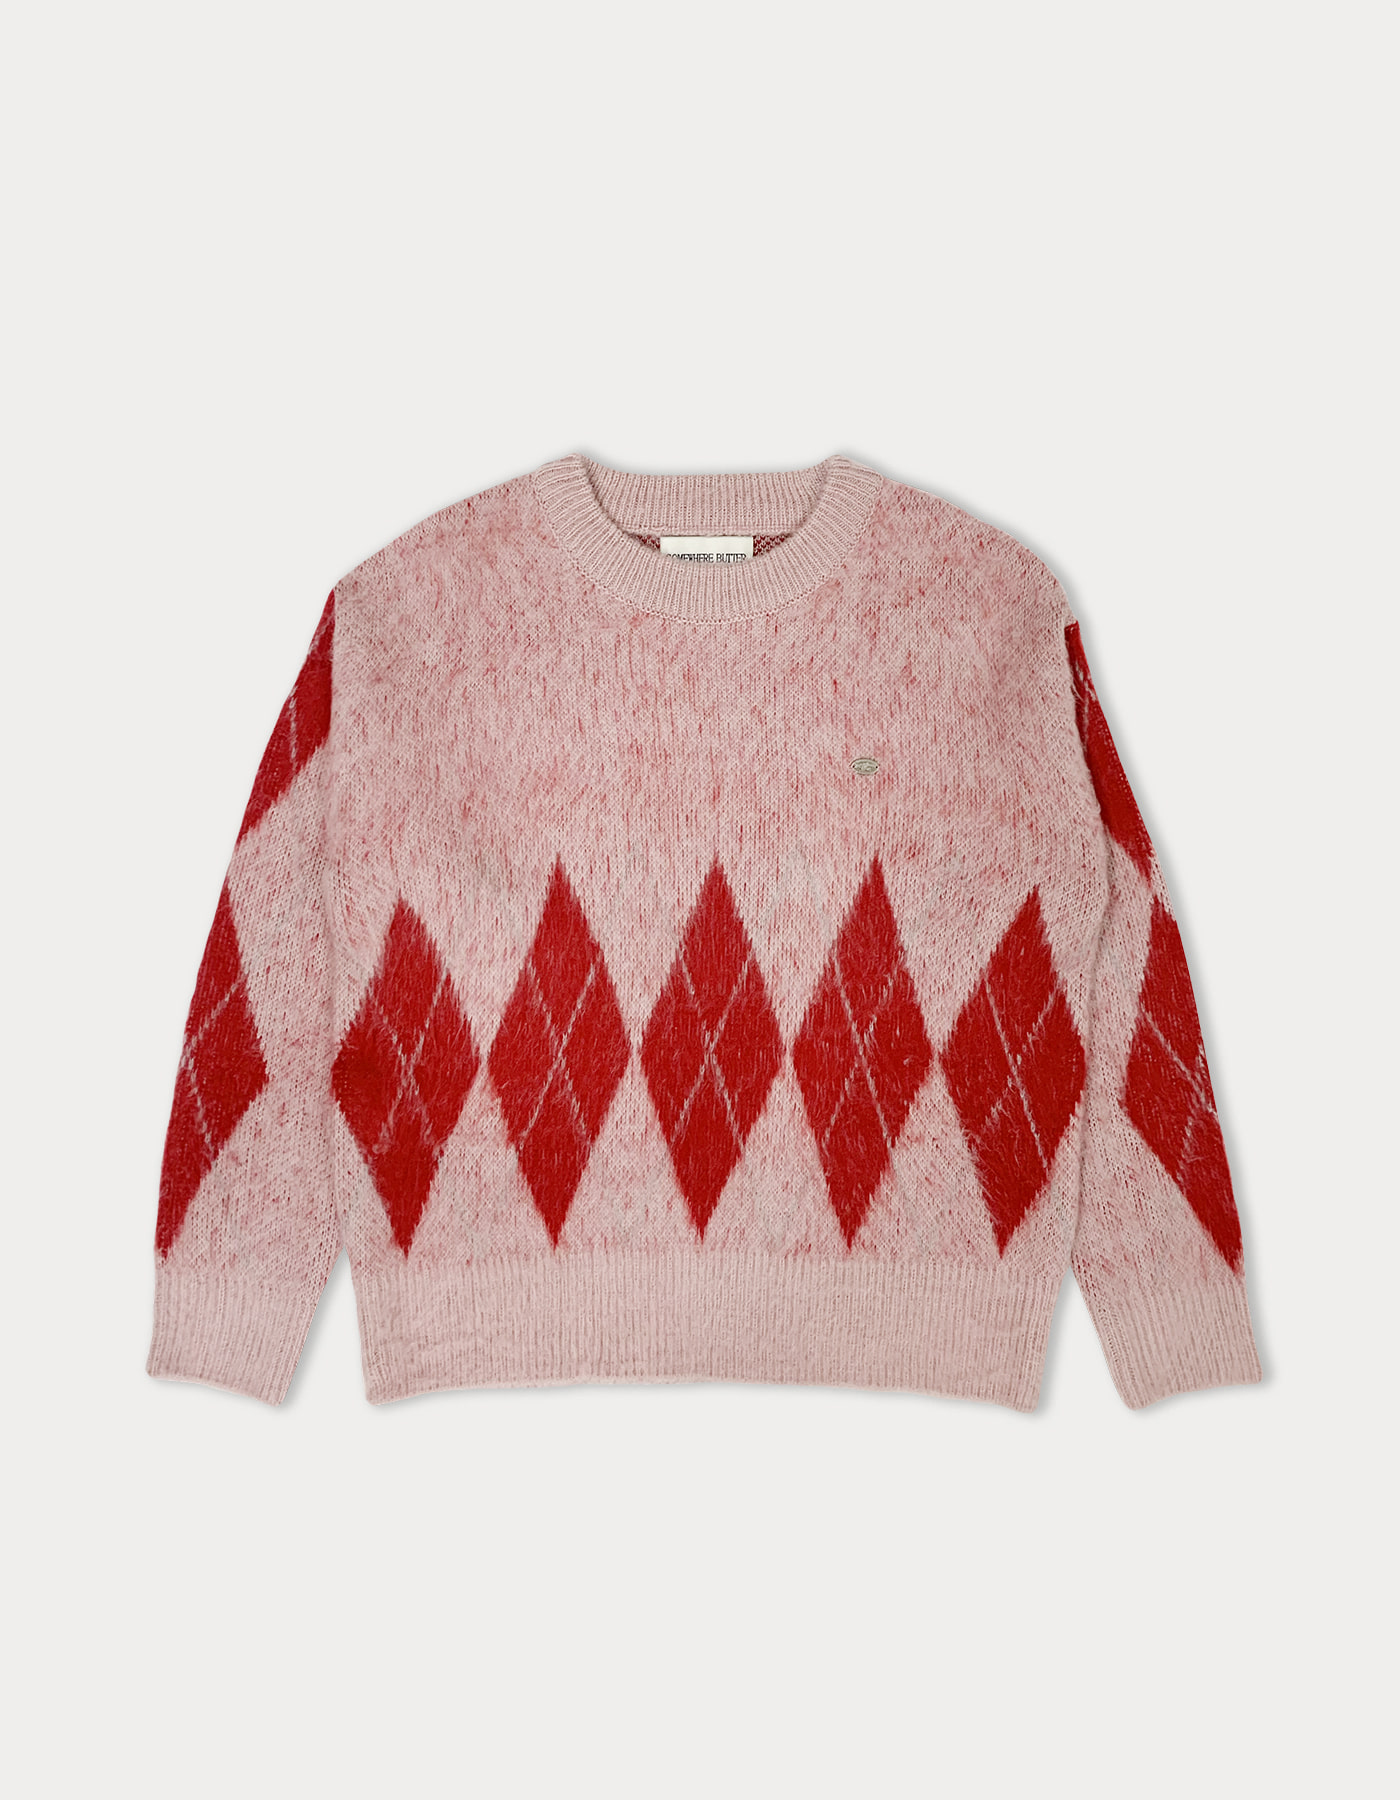 hairy argyle check knit - pink